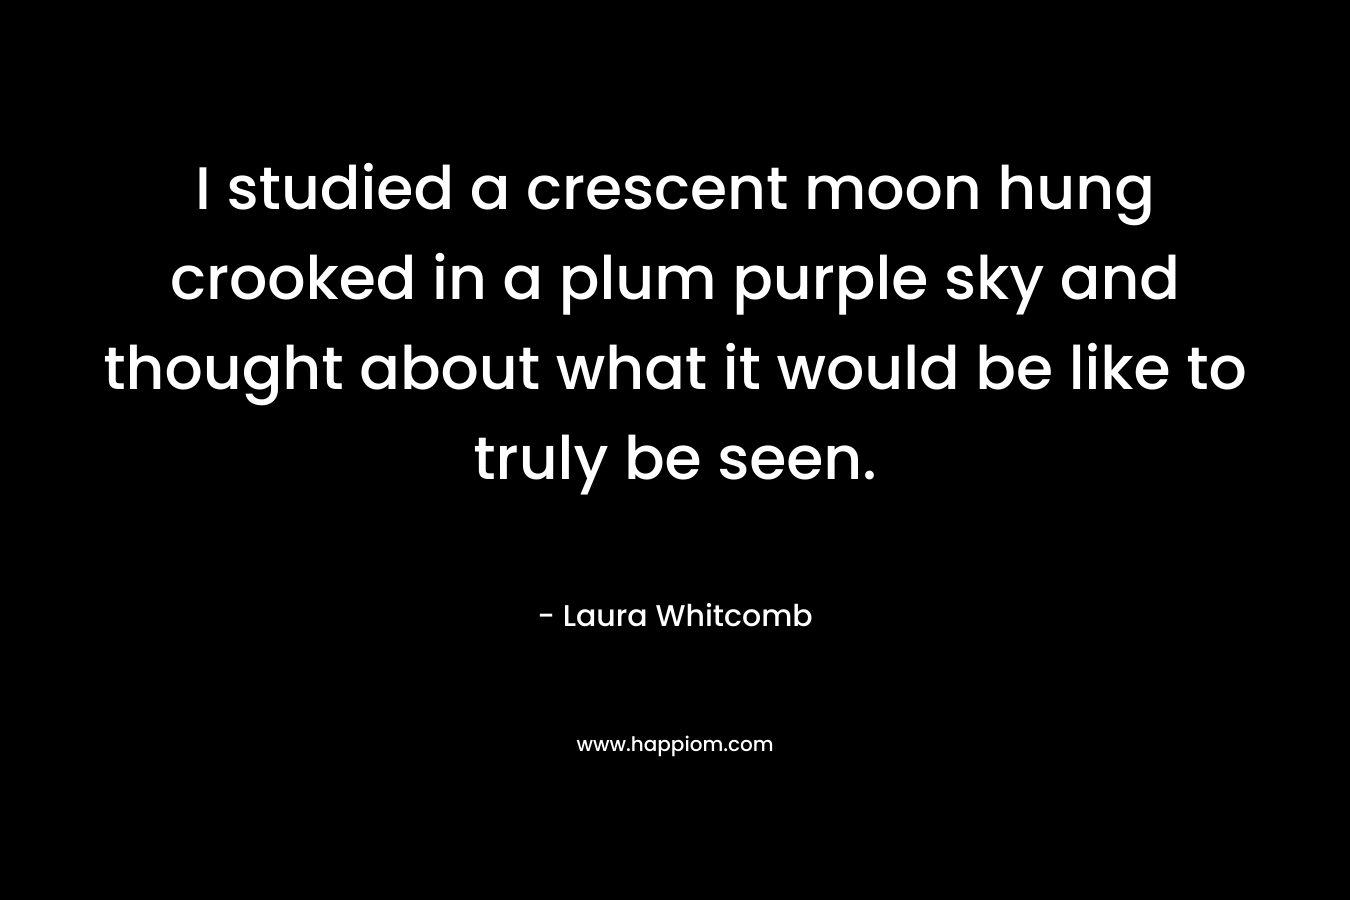 I studied a crescent moon hung crooked in a plum purple sky and thought about what it would be like to truly be seen. – Laura Whitcomb